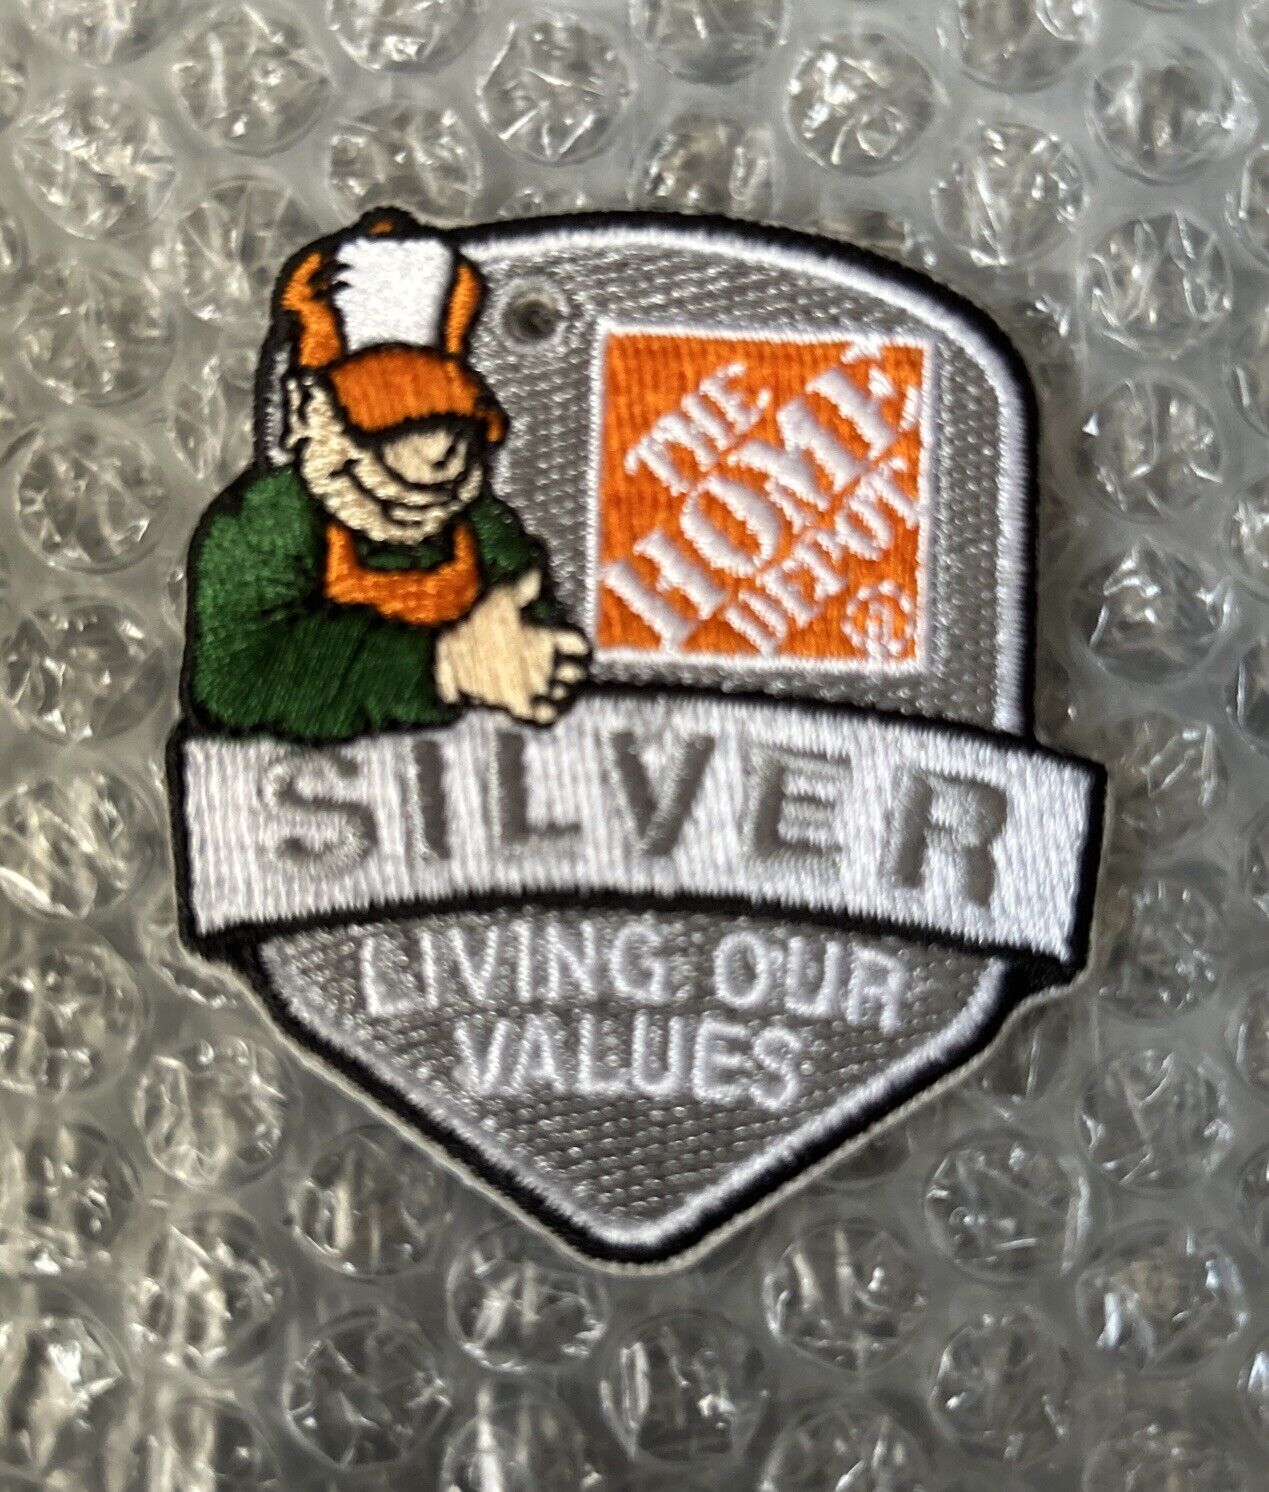 Home Depot Living Our Values Silver Award Patch-NEW